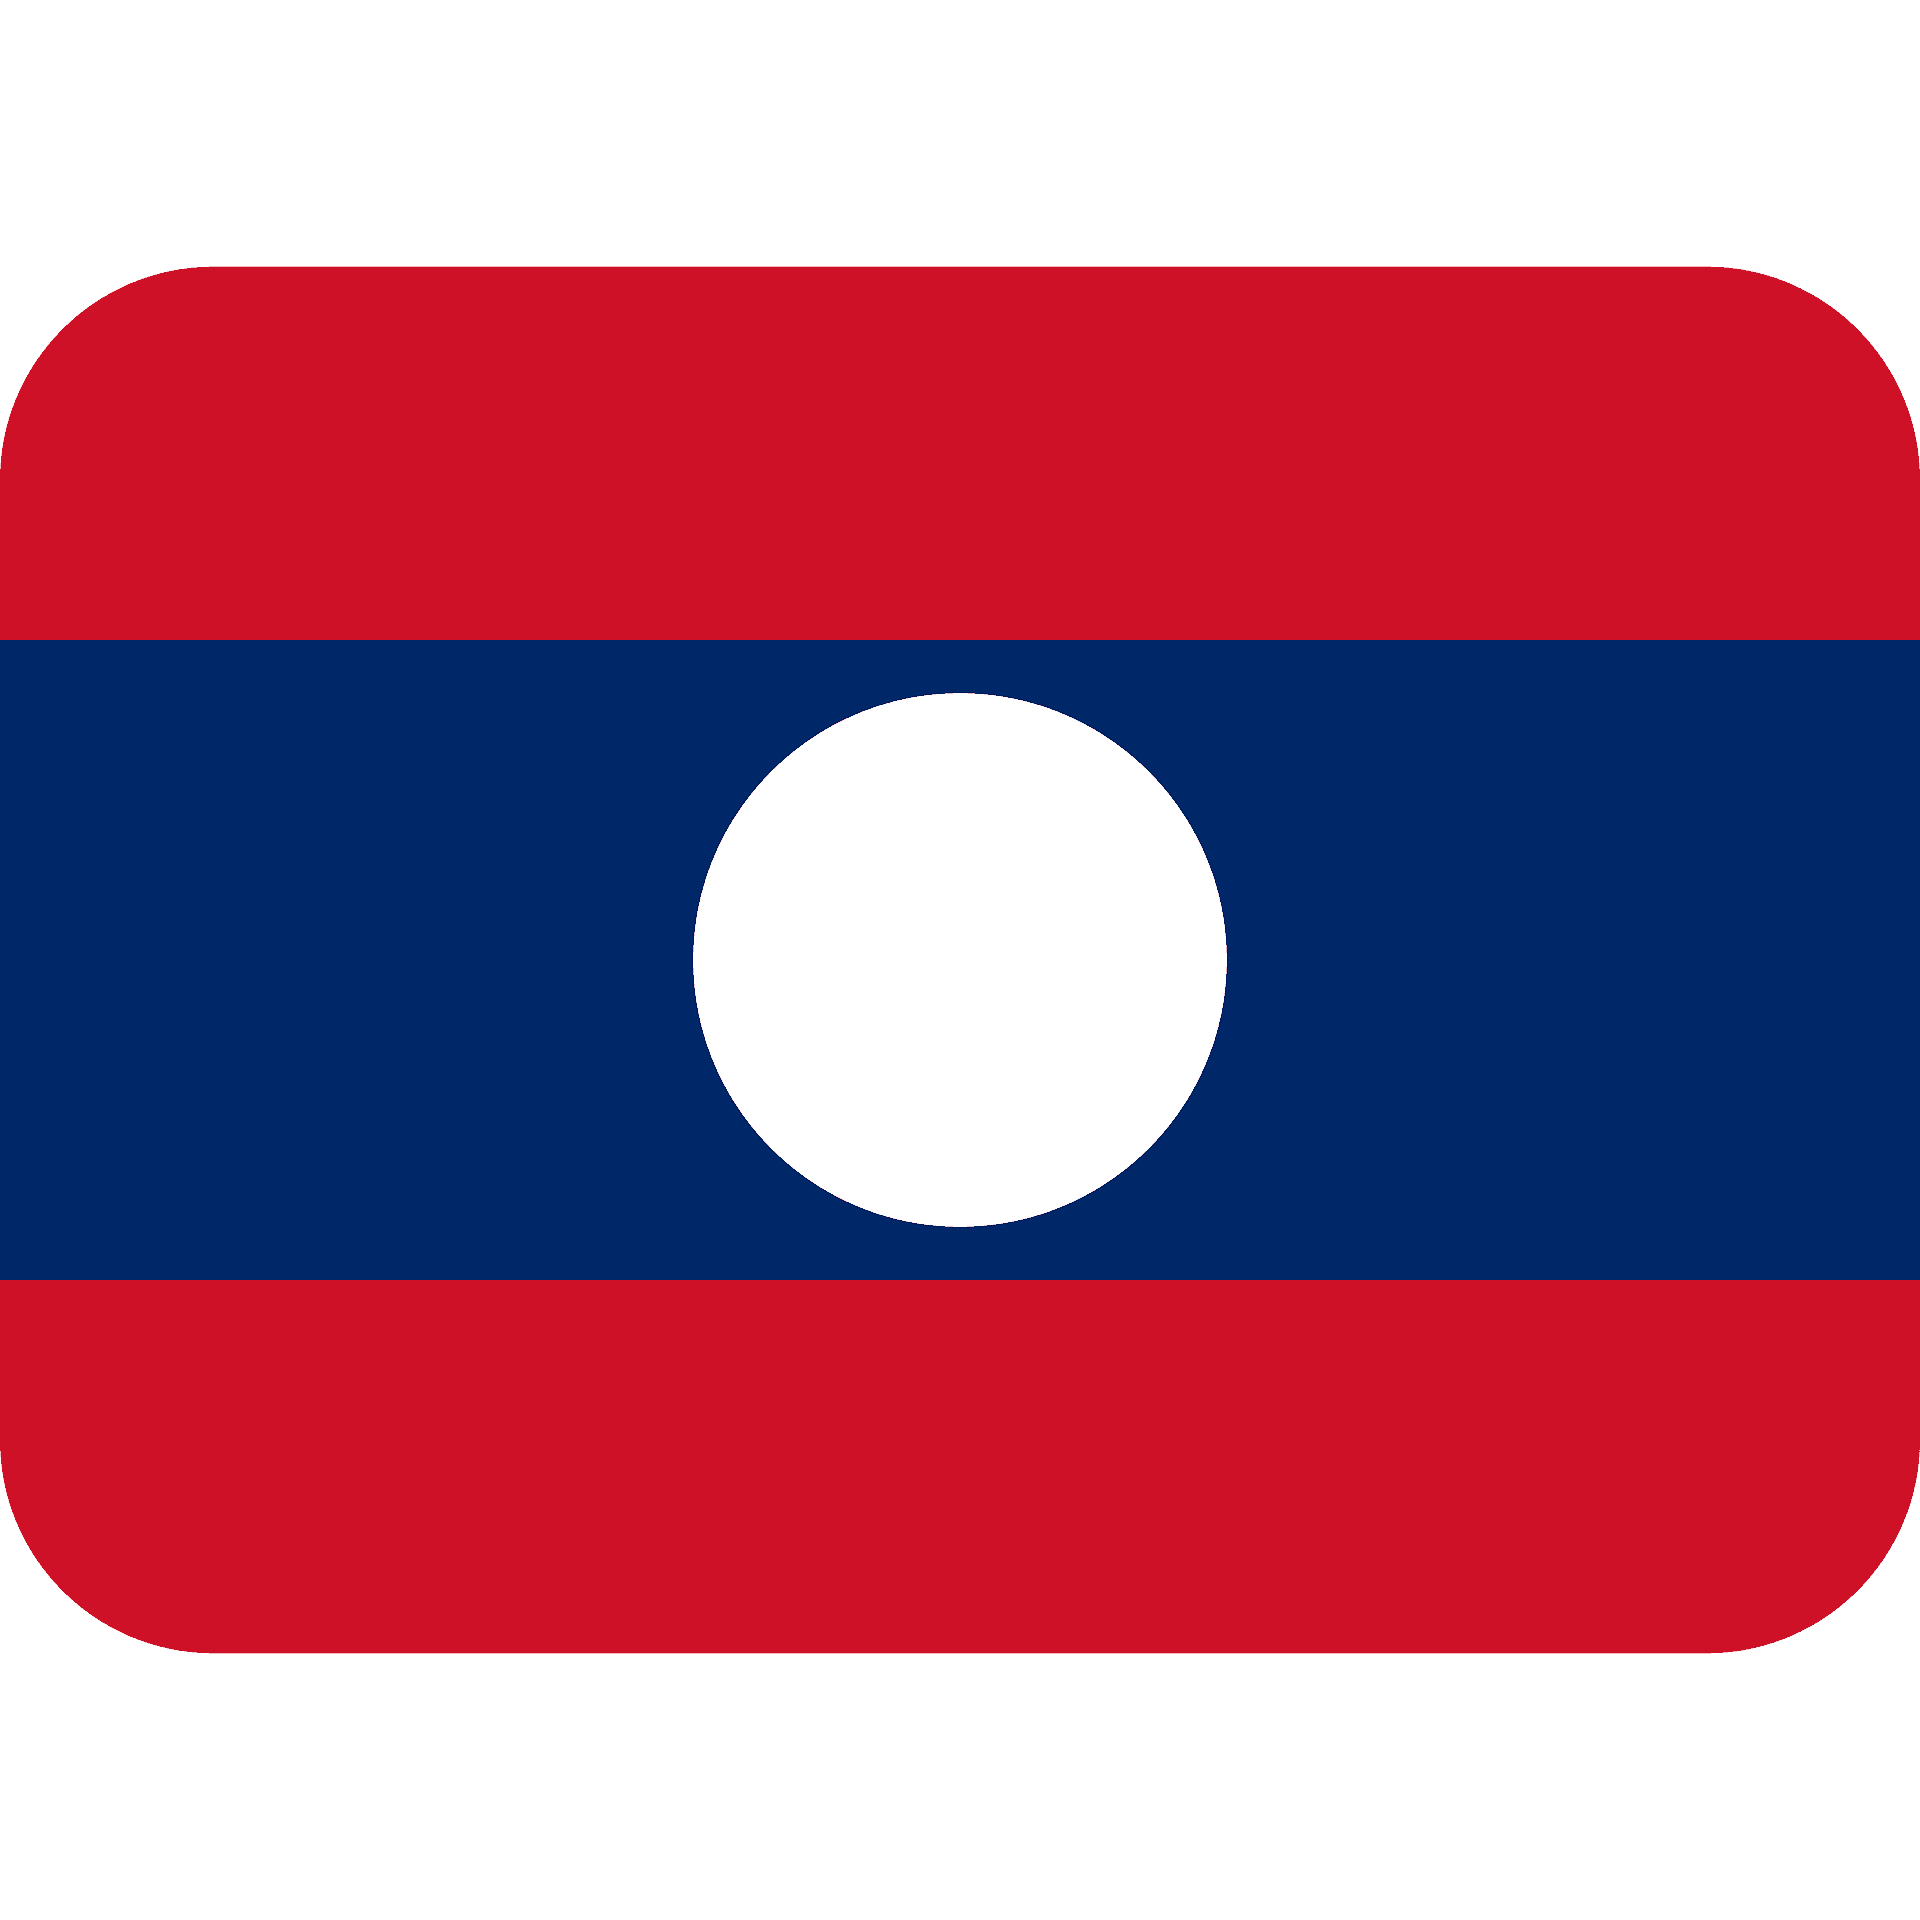 A Red Blue And White Flag With A White Circle